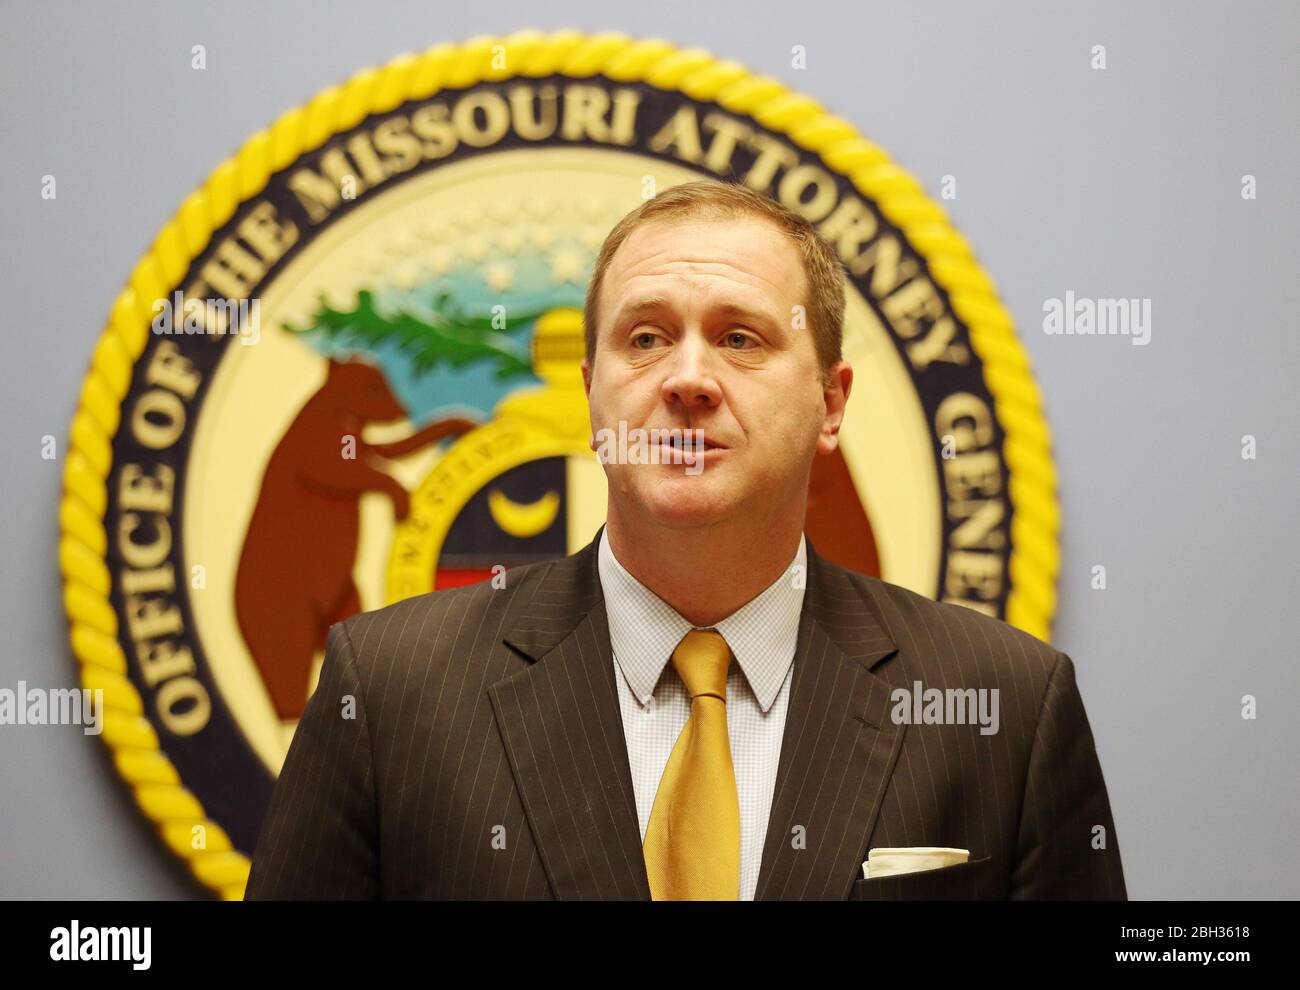 Missouri Attorney General Eric Schmitt, shown in this January 22, 2019 file photo, is suing the Chinese government, his office announced on Tuesday, April 21, 2020. The lawsuit, filed in the U.S. Credit: UPI/Alamy Live News Stock Photo